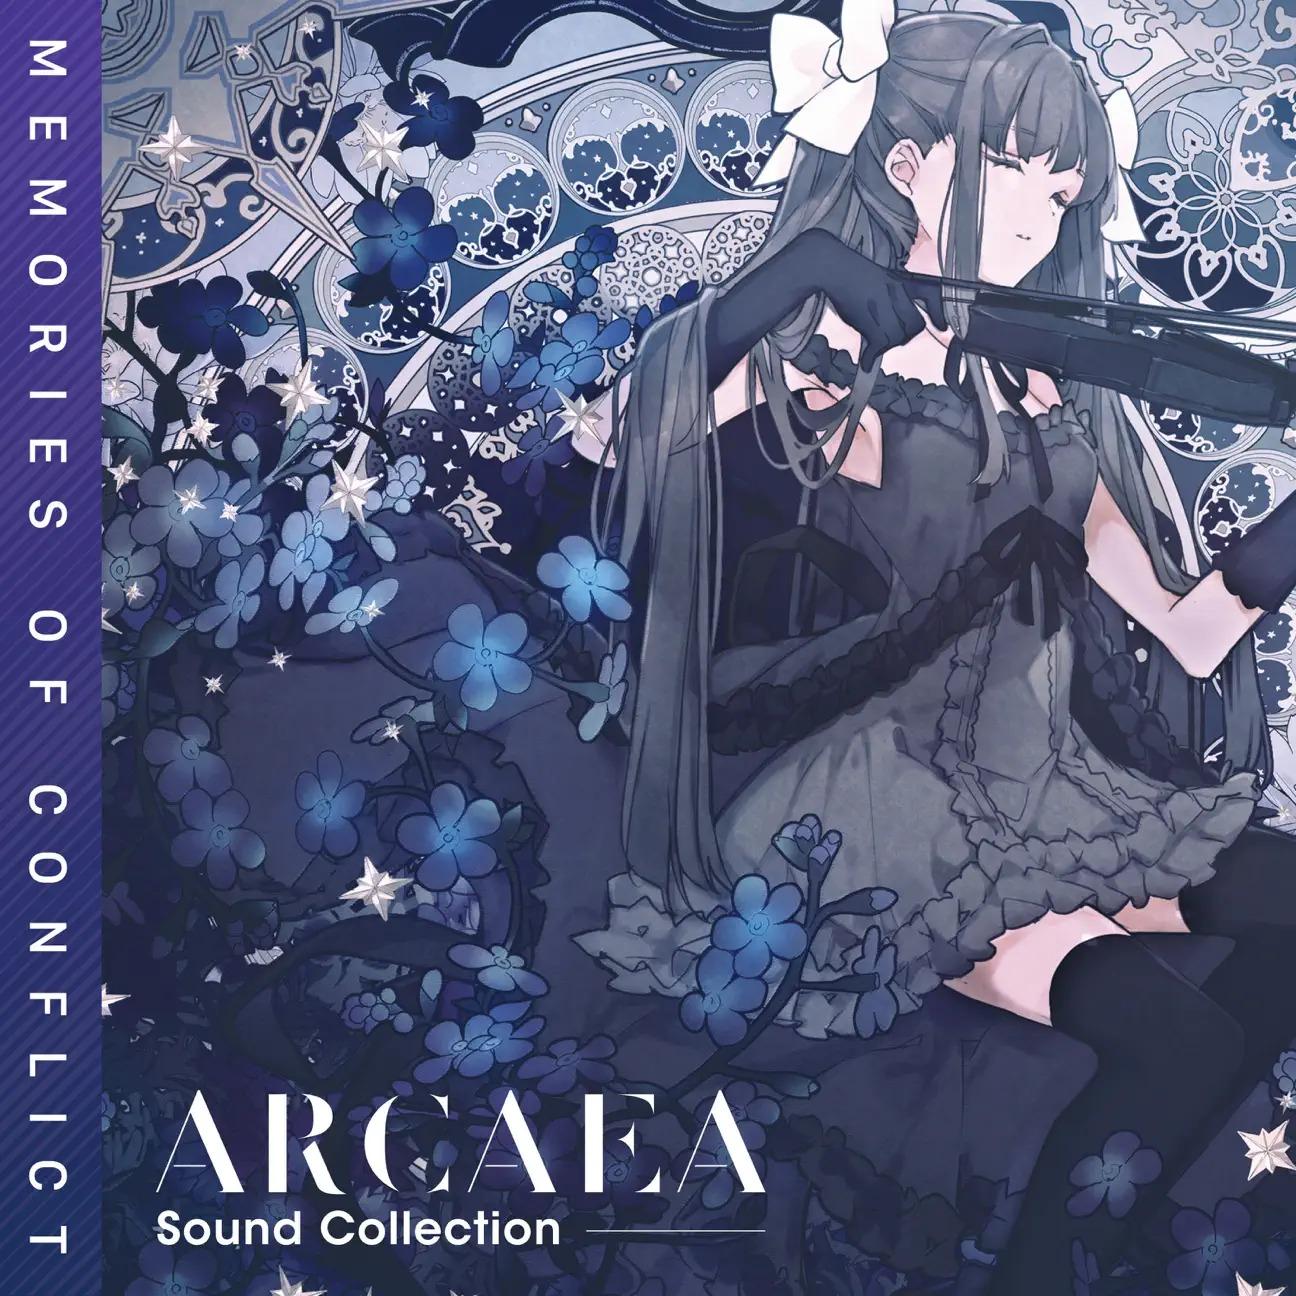 Arcaea Sound Collection - Memories of Conflict